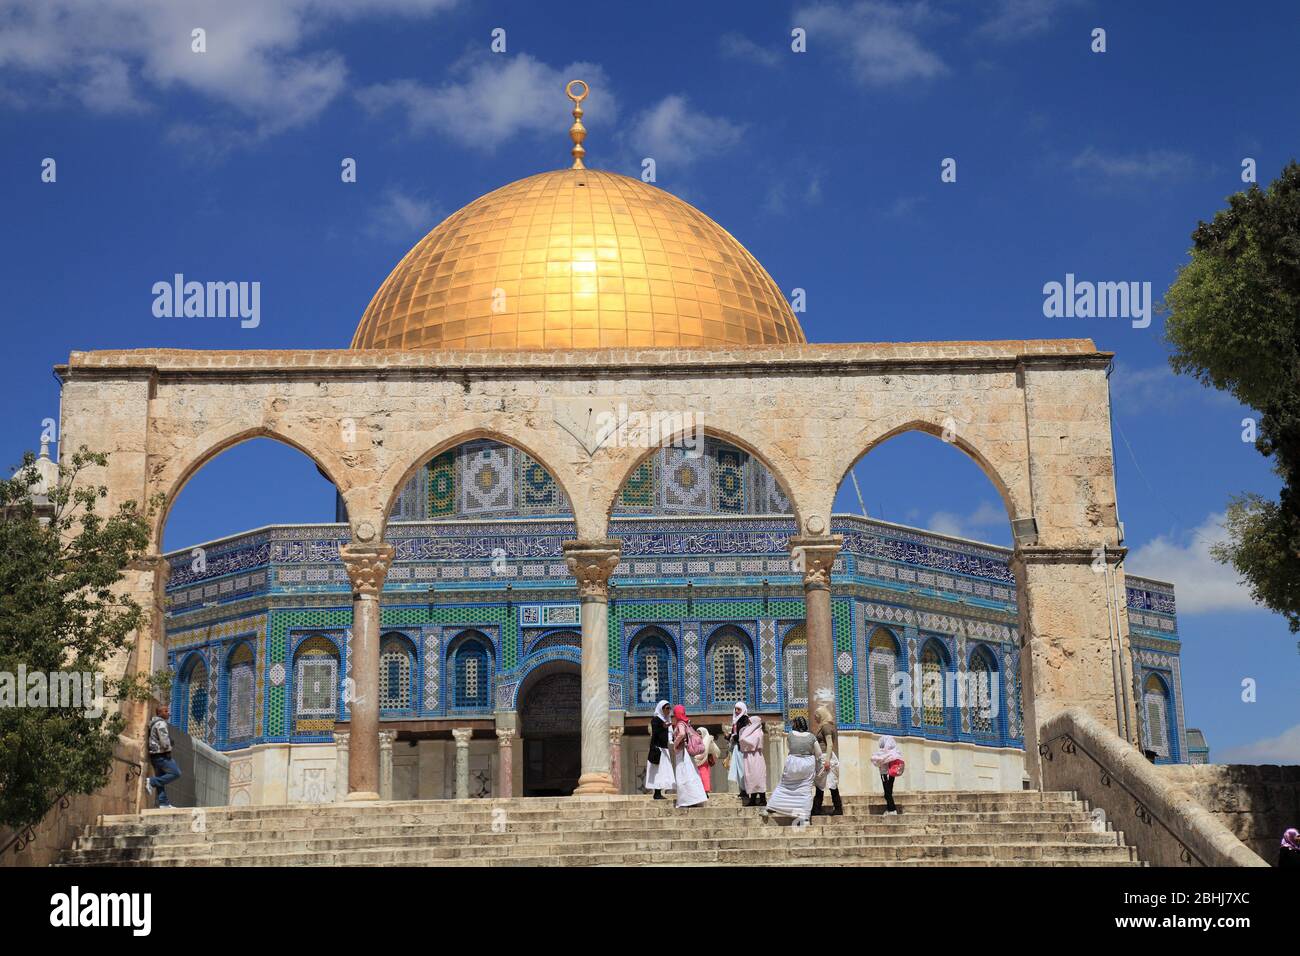 Mousque of Al-aqsa (Dome of the Rock) in Old Town. There are many historical buildings in the courtyard of Masjid Aksa Mosque. Stock Photo